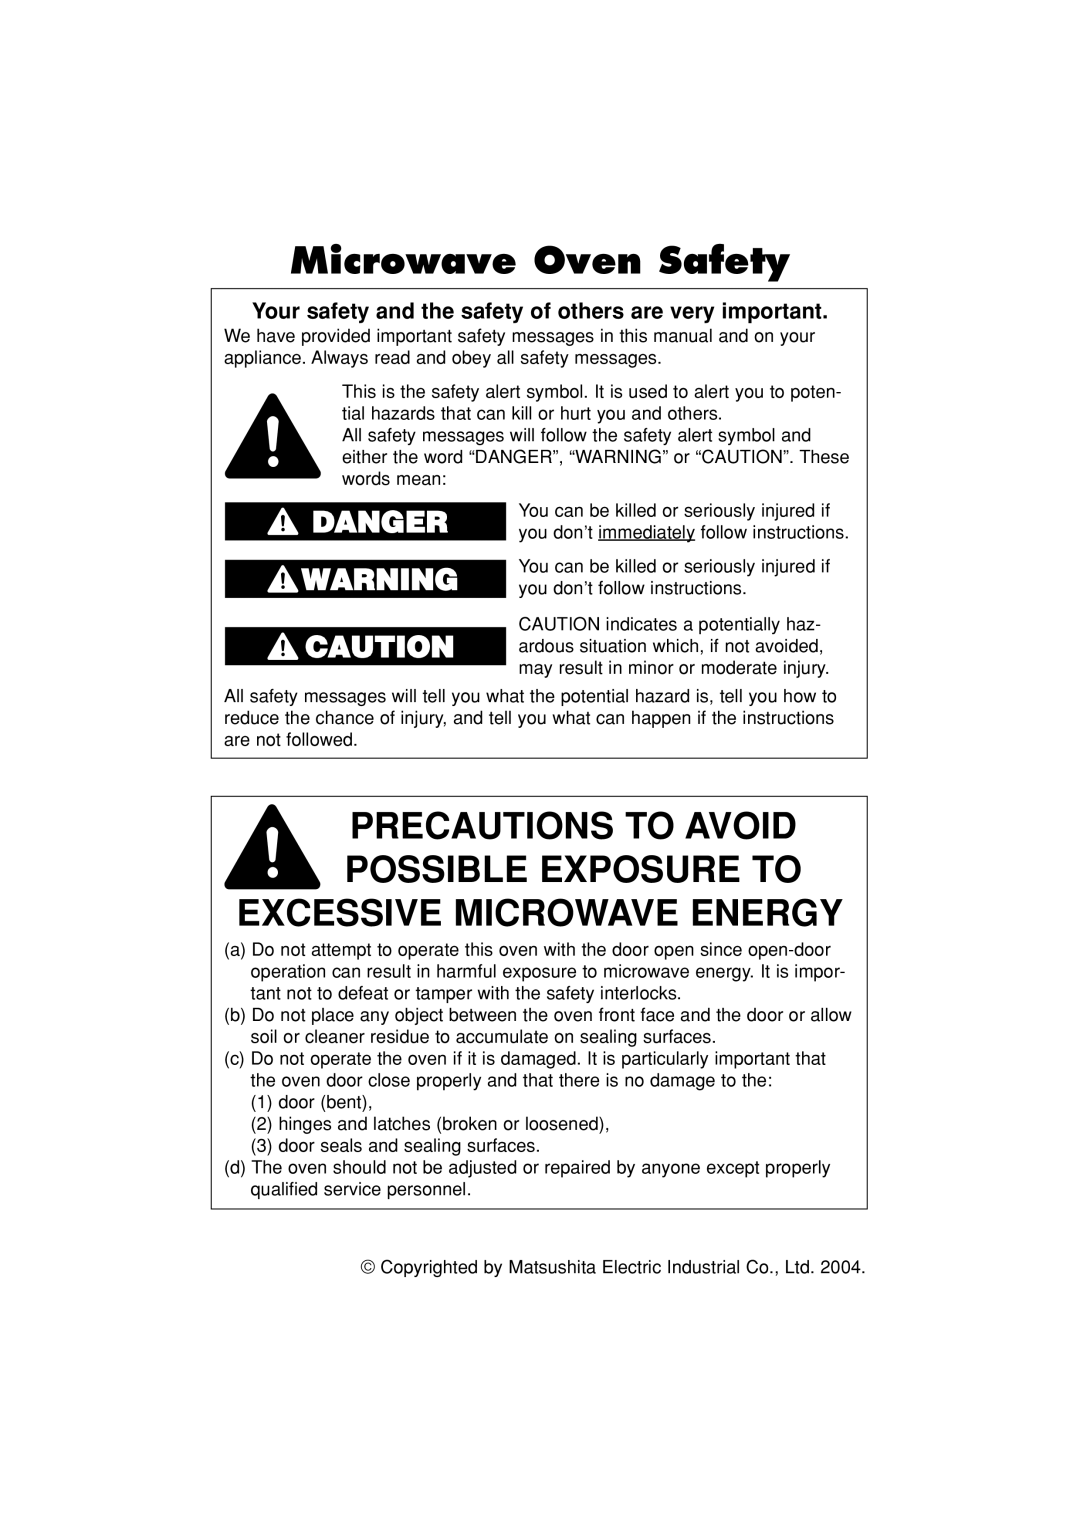 Panasonic NN-S334 Excessive Microwave Energy, Precautions To Avoid Possible Exposure To, Danger, Microwave Oven Safety 